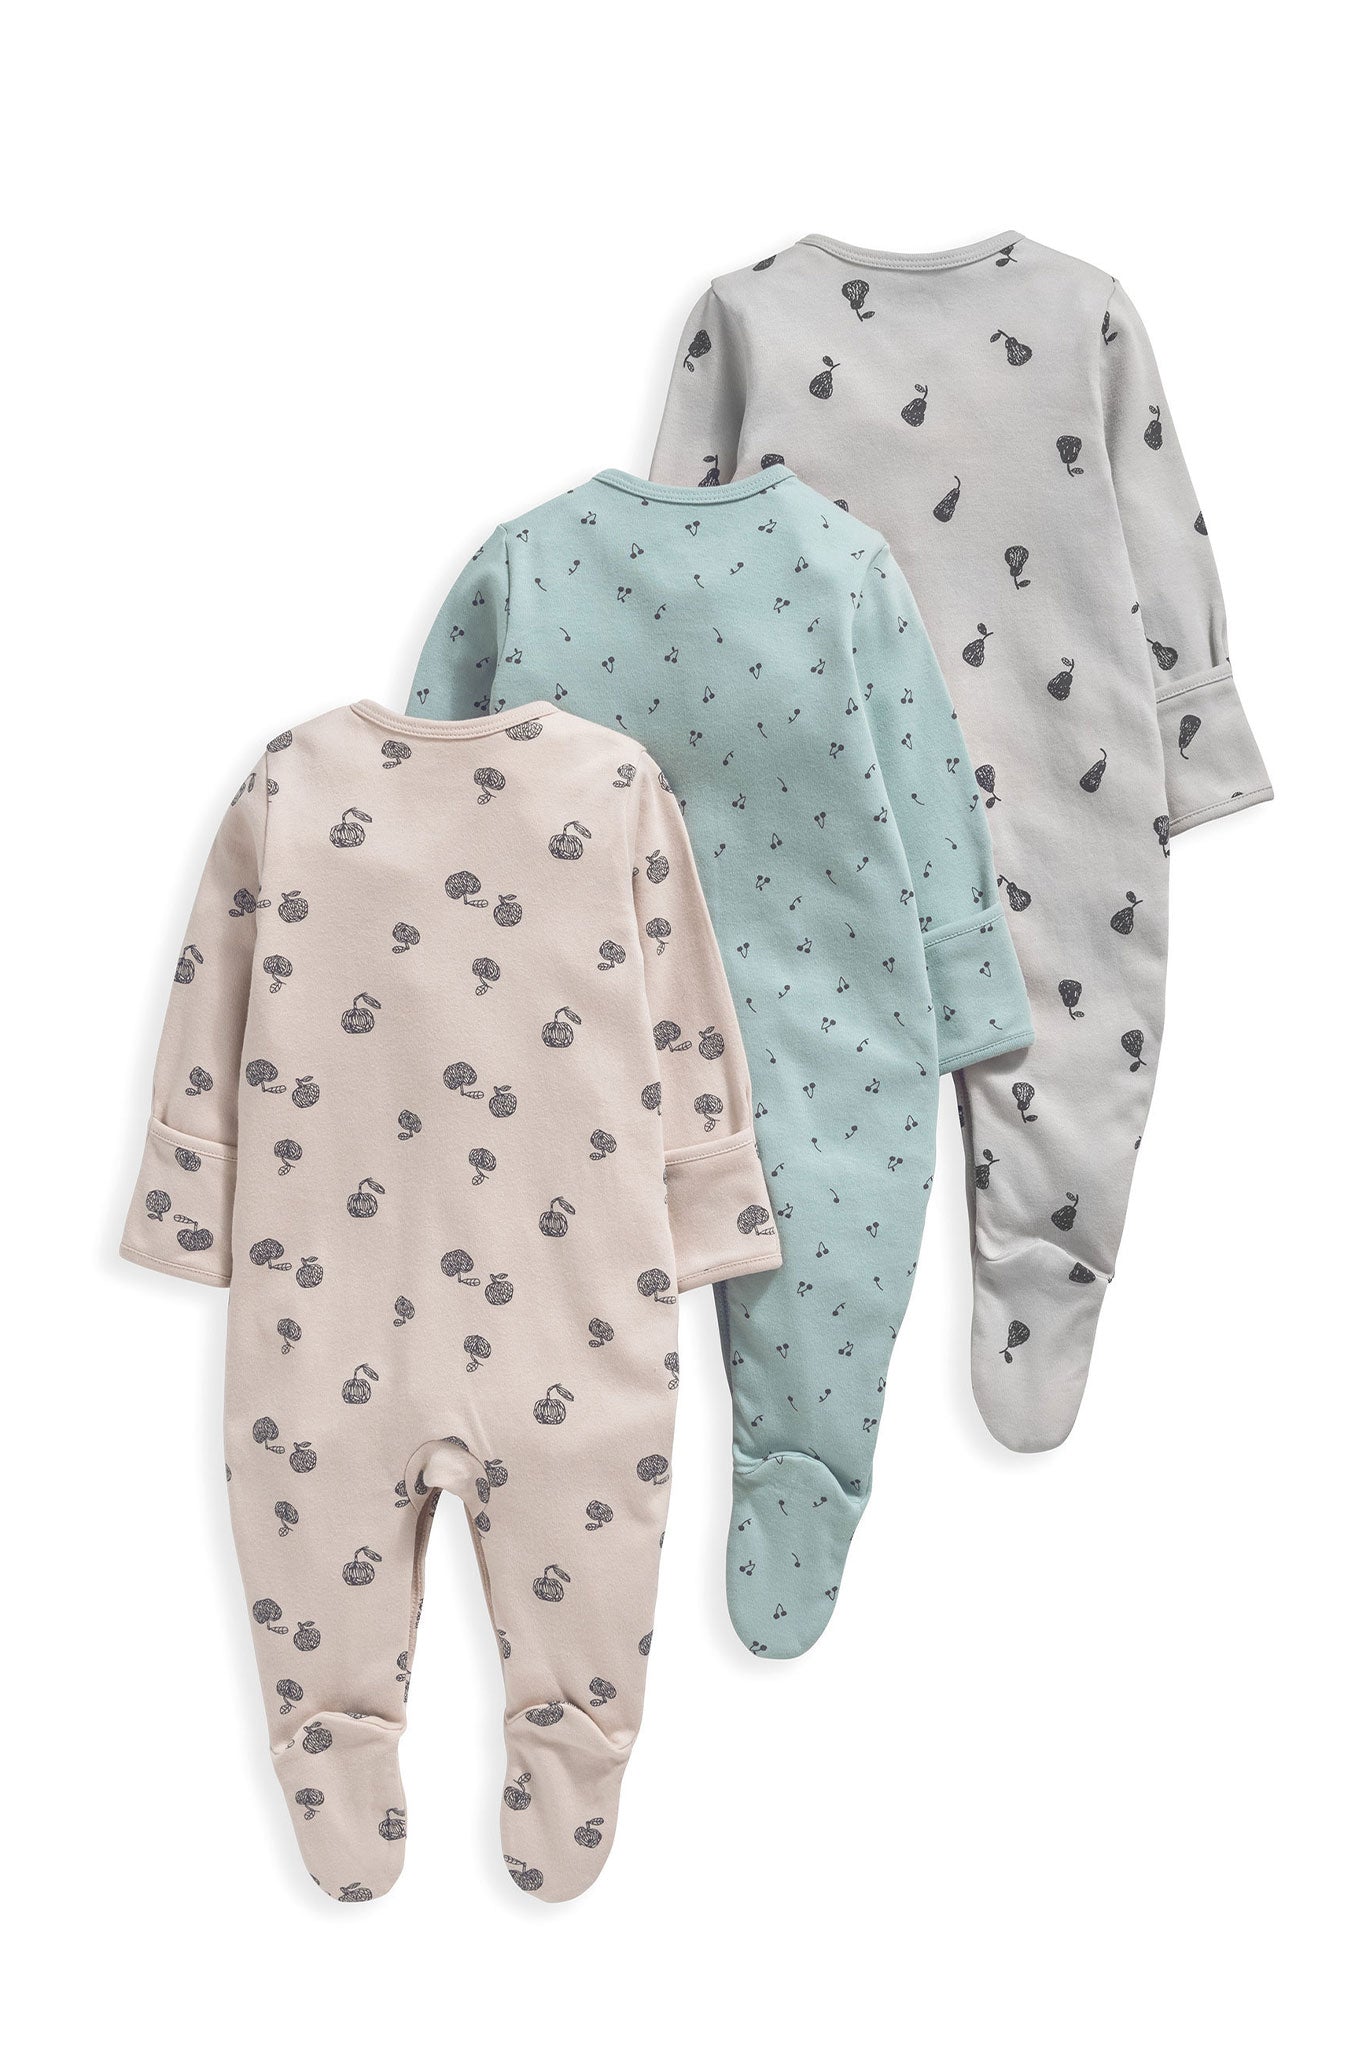 Mamas & Papas Orchard Sleepsuits - 3 Pack